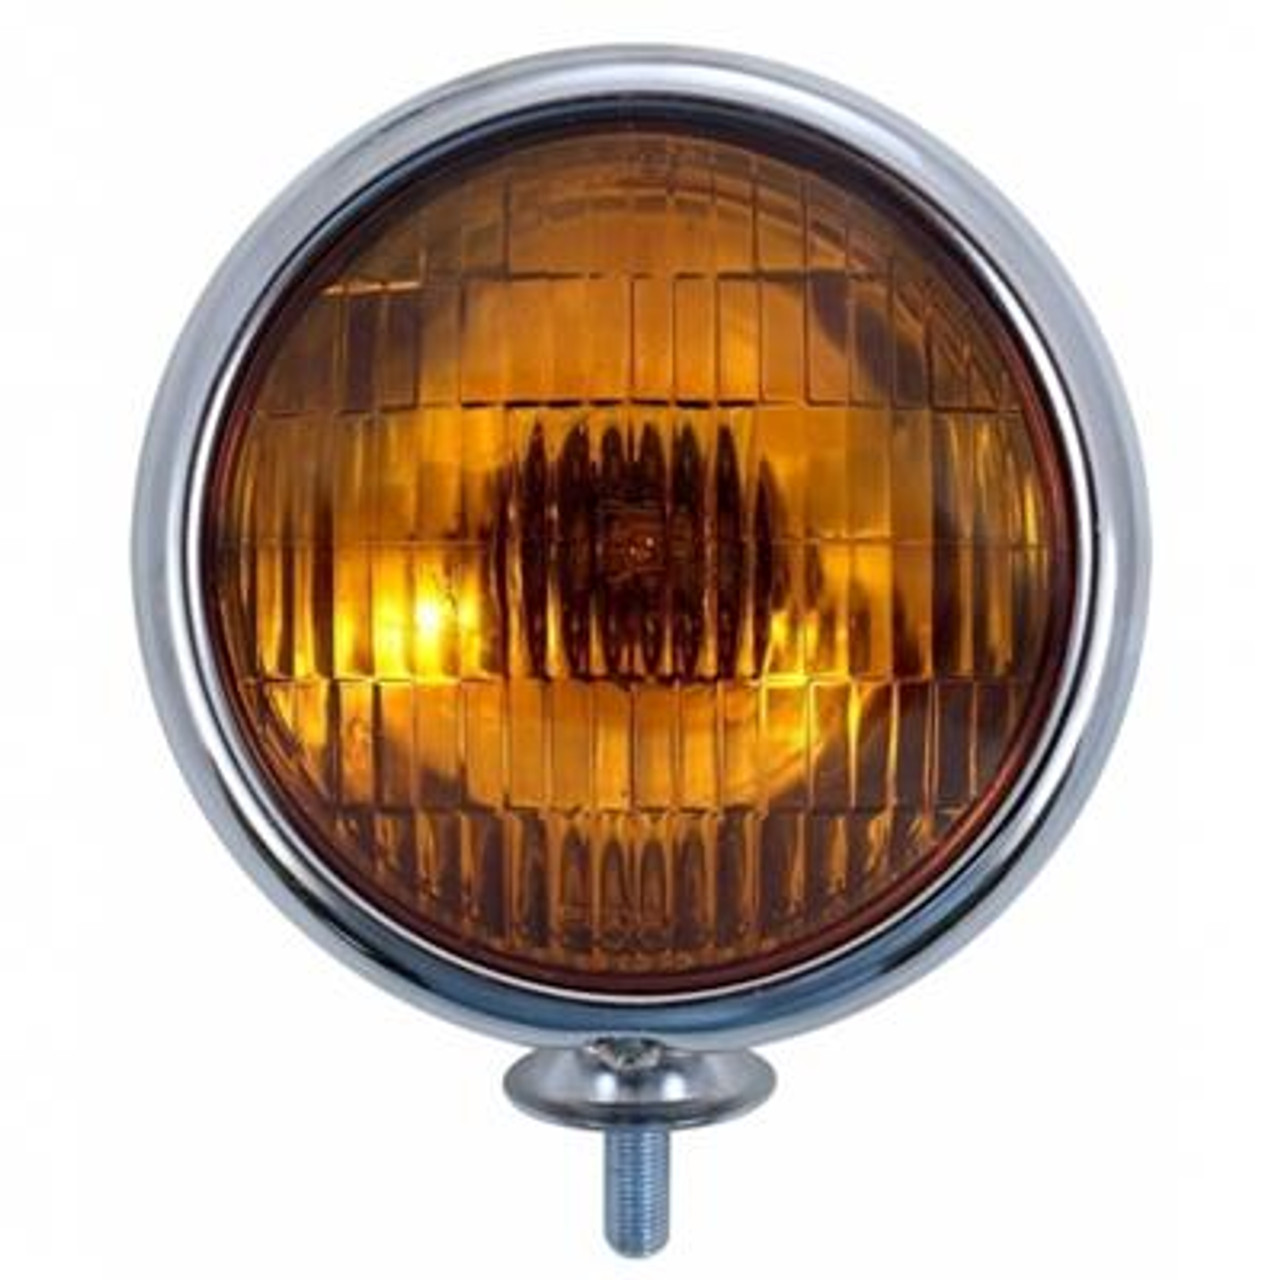 Fog lights by United Pacific don't only look cool, but they also provide more safety in inclement weather.